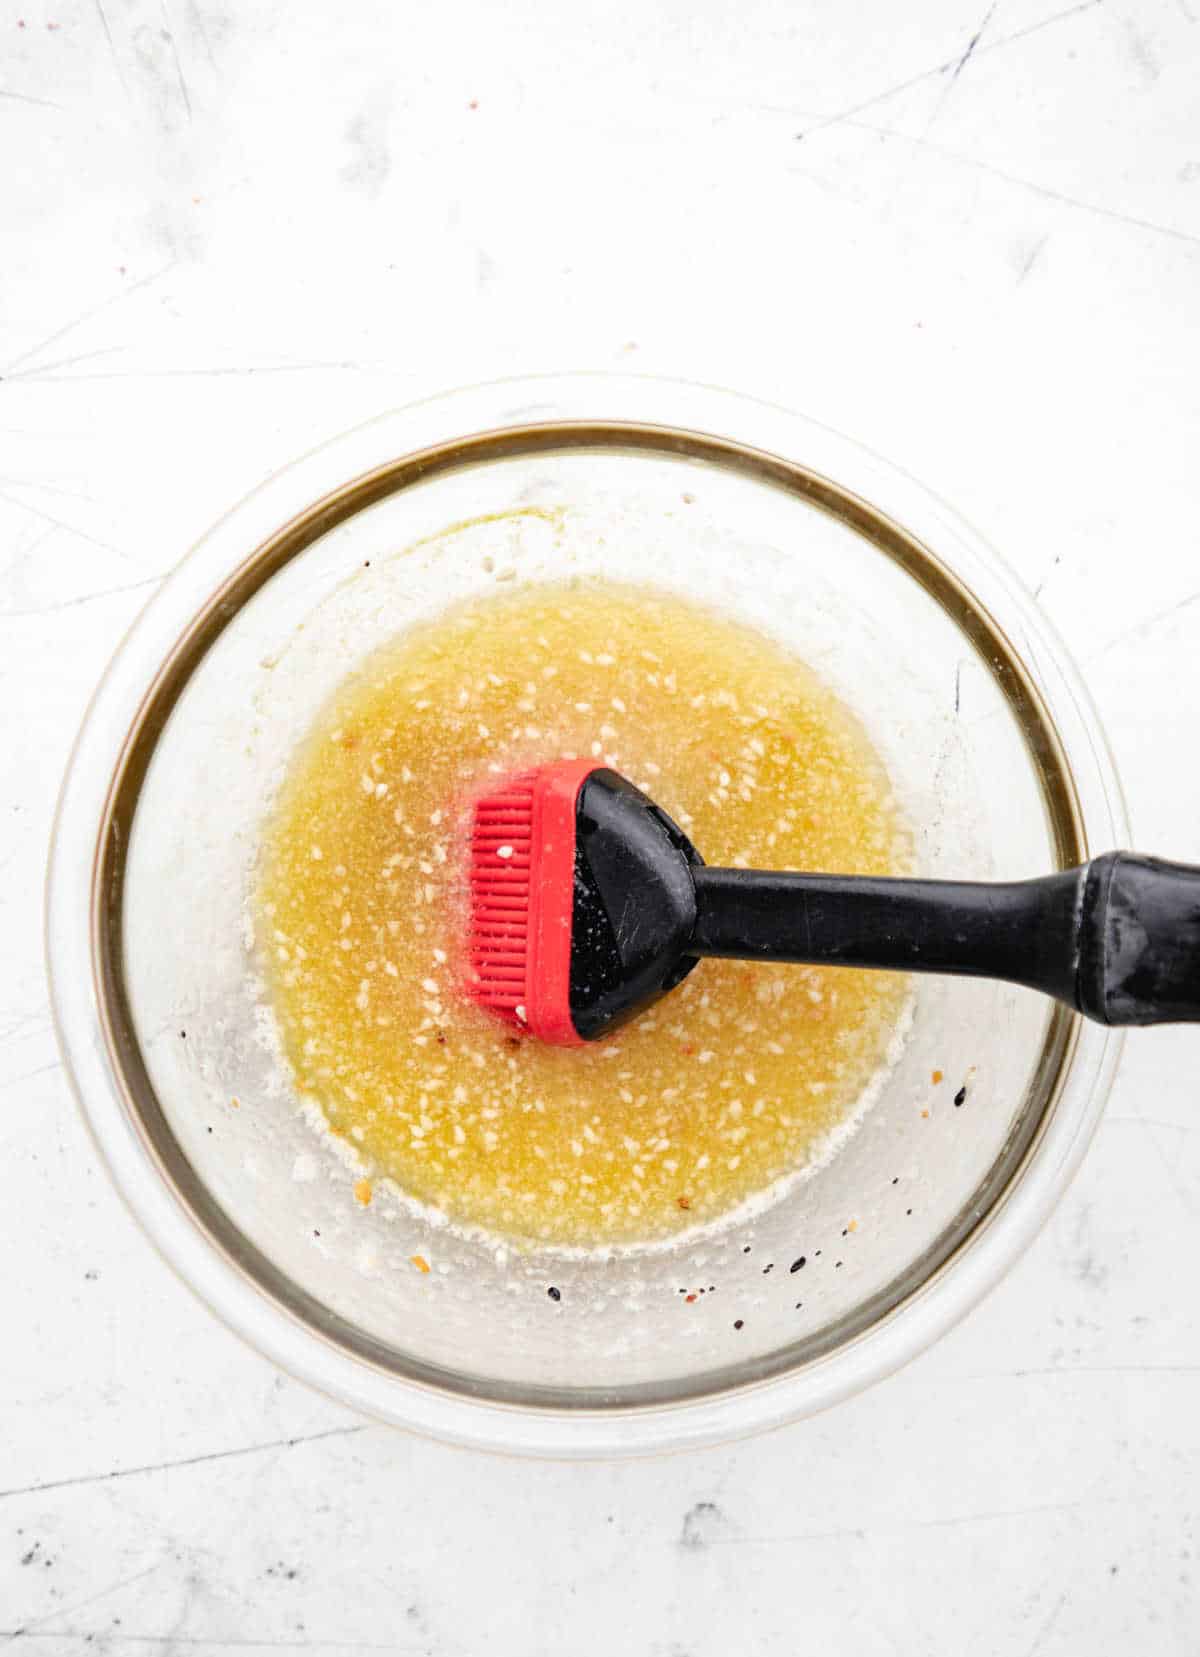 Butter topping in a glass mixing bowl with a basting brush in it.